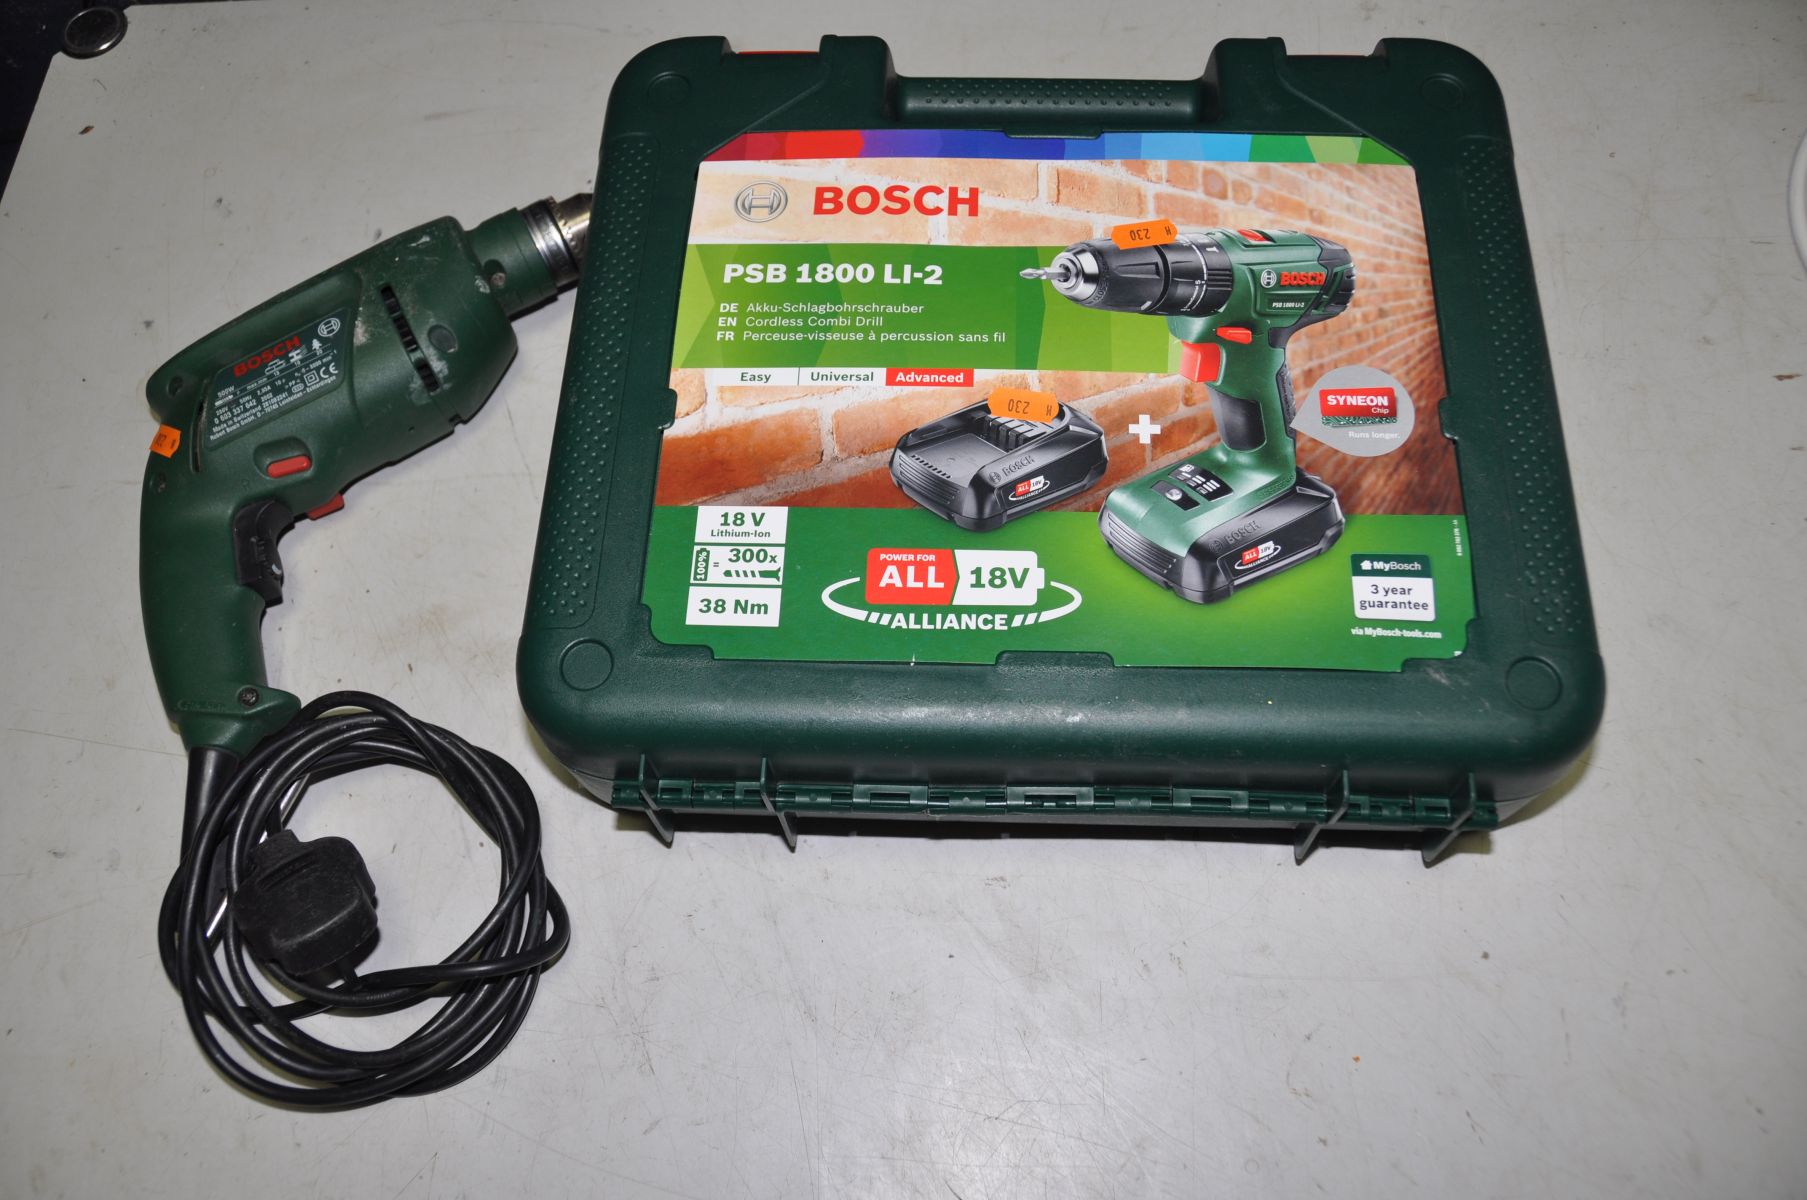 A BOXED BOSCH PSB 1800 LI-2 CORDLESS DRILL, with two chargers and charger (PAT pass, working, and